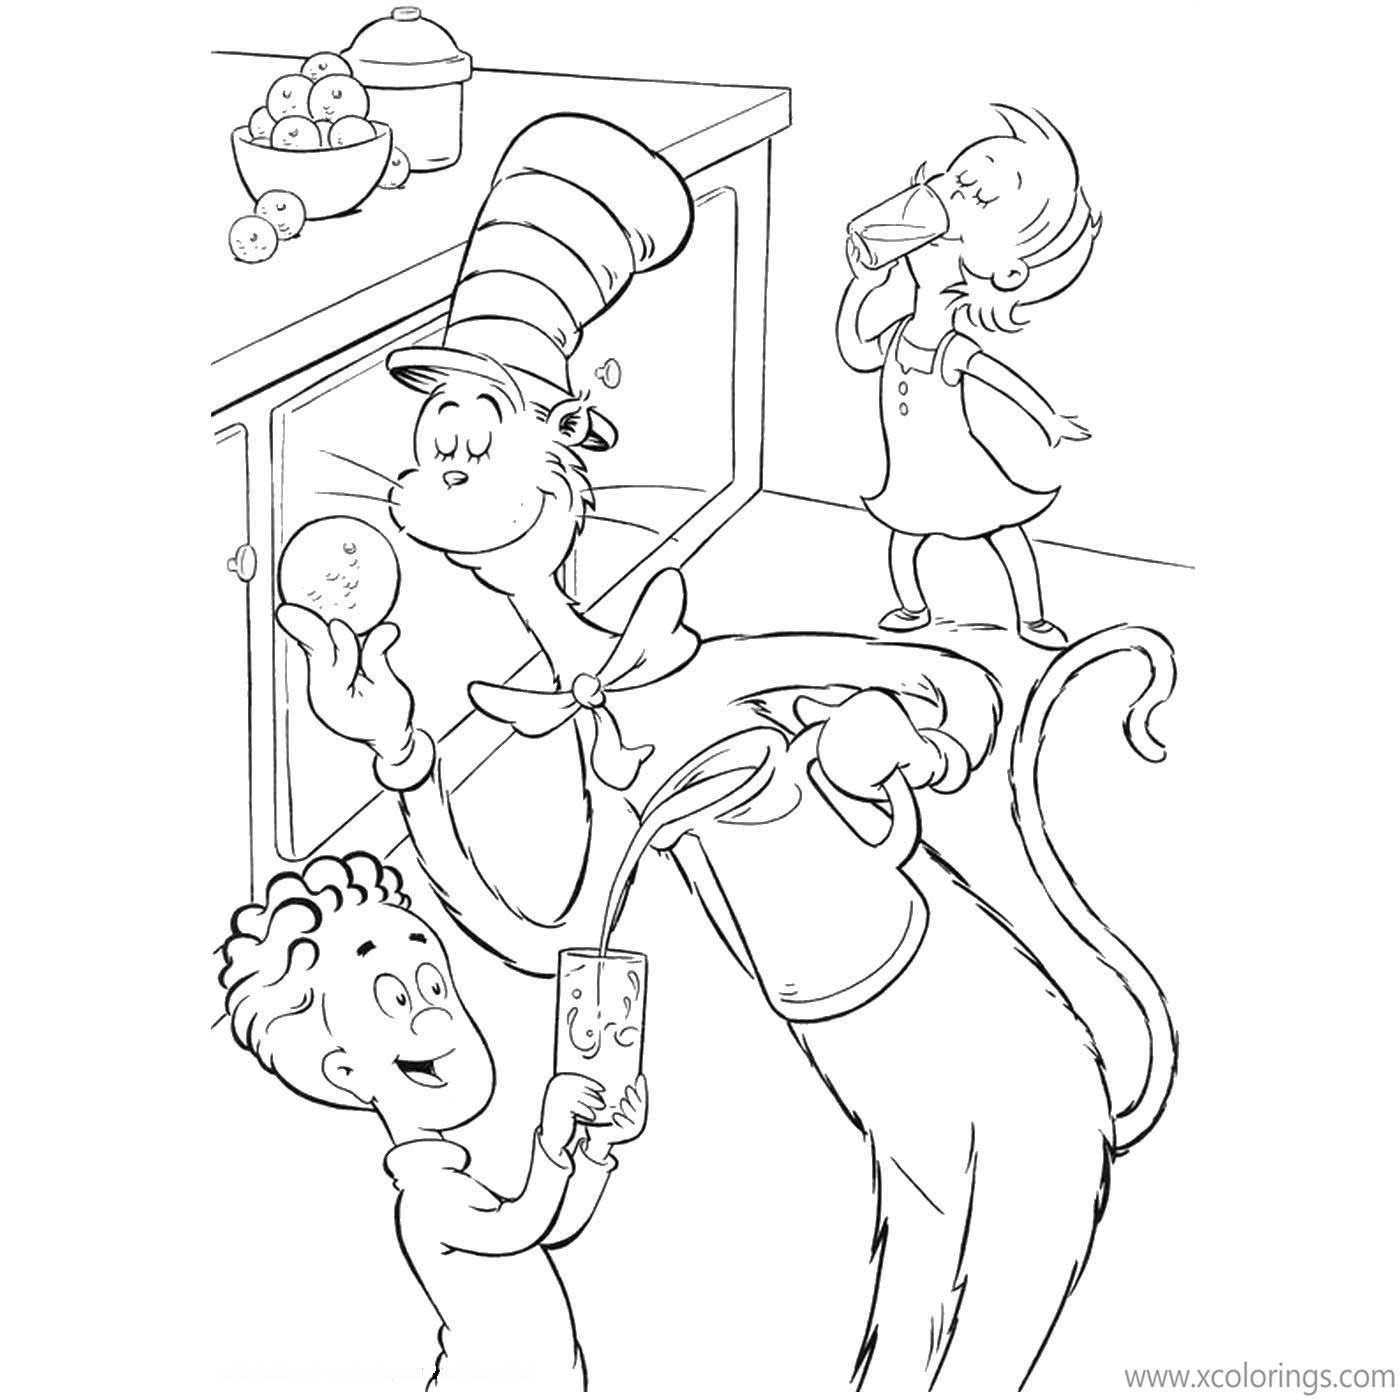 Free Cat In The Hat Coloring Pages In the Kitchen printable